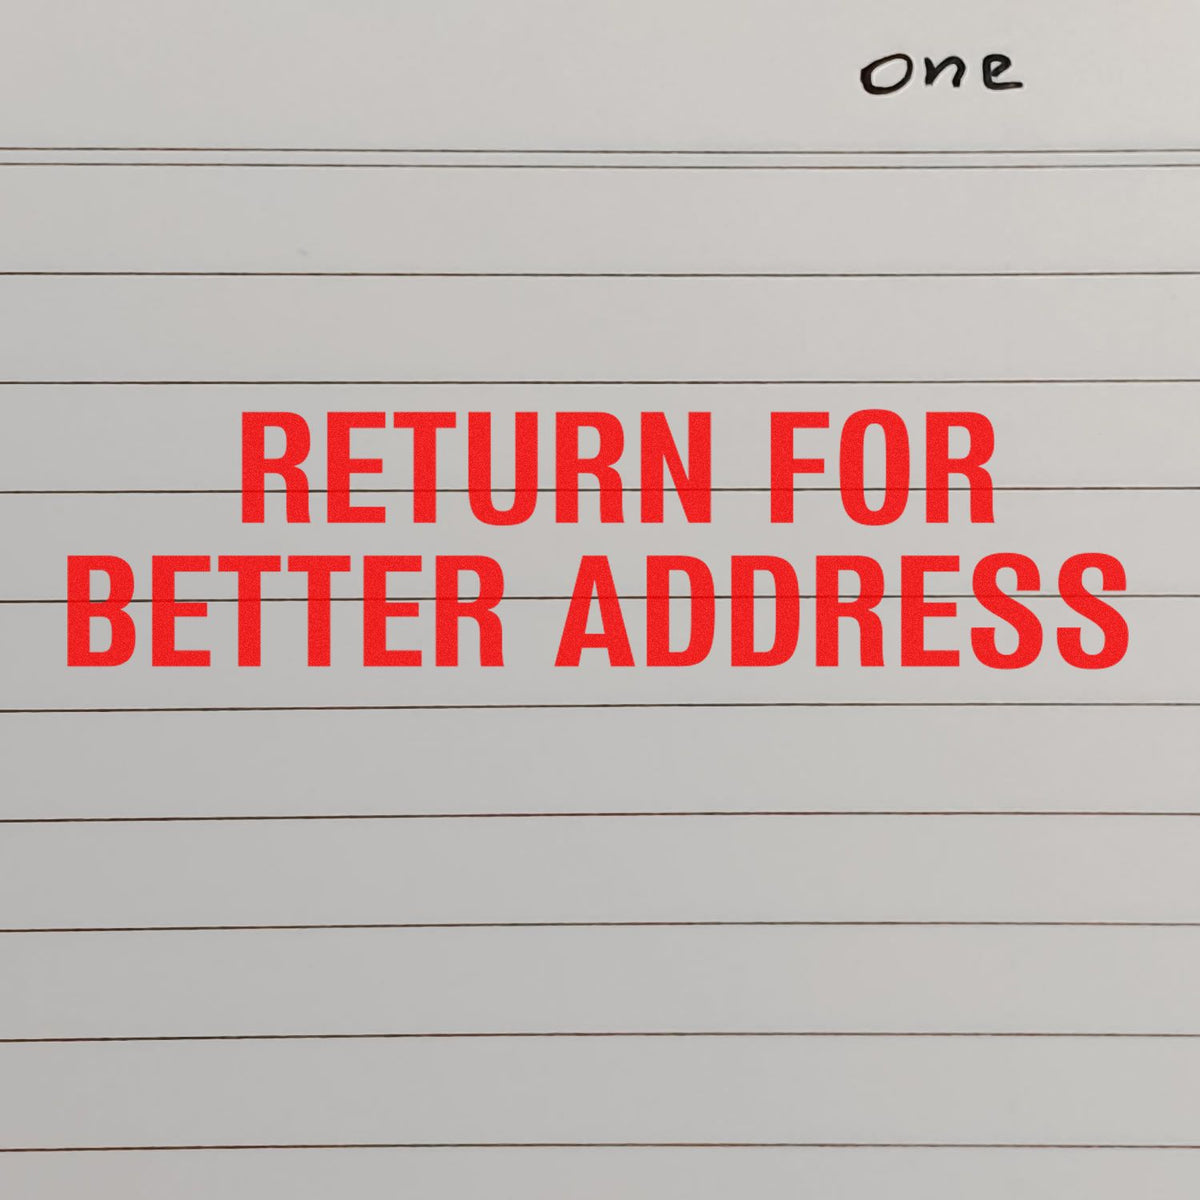 Large Self-Inking Return for Better Address Stamp In Use Photo